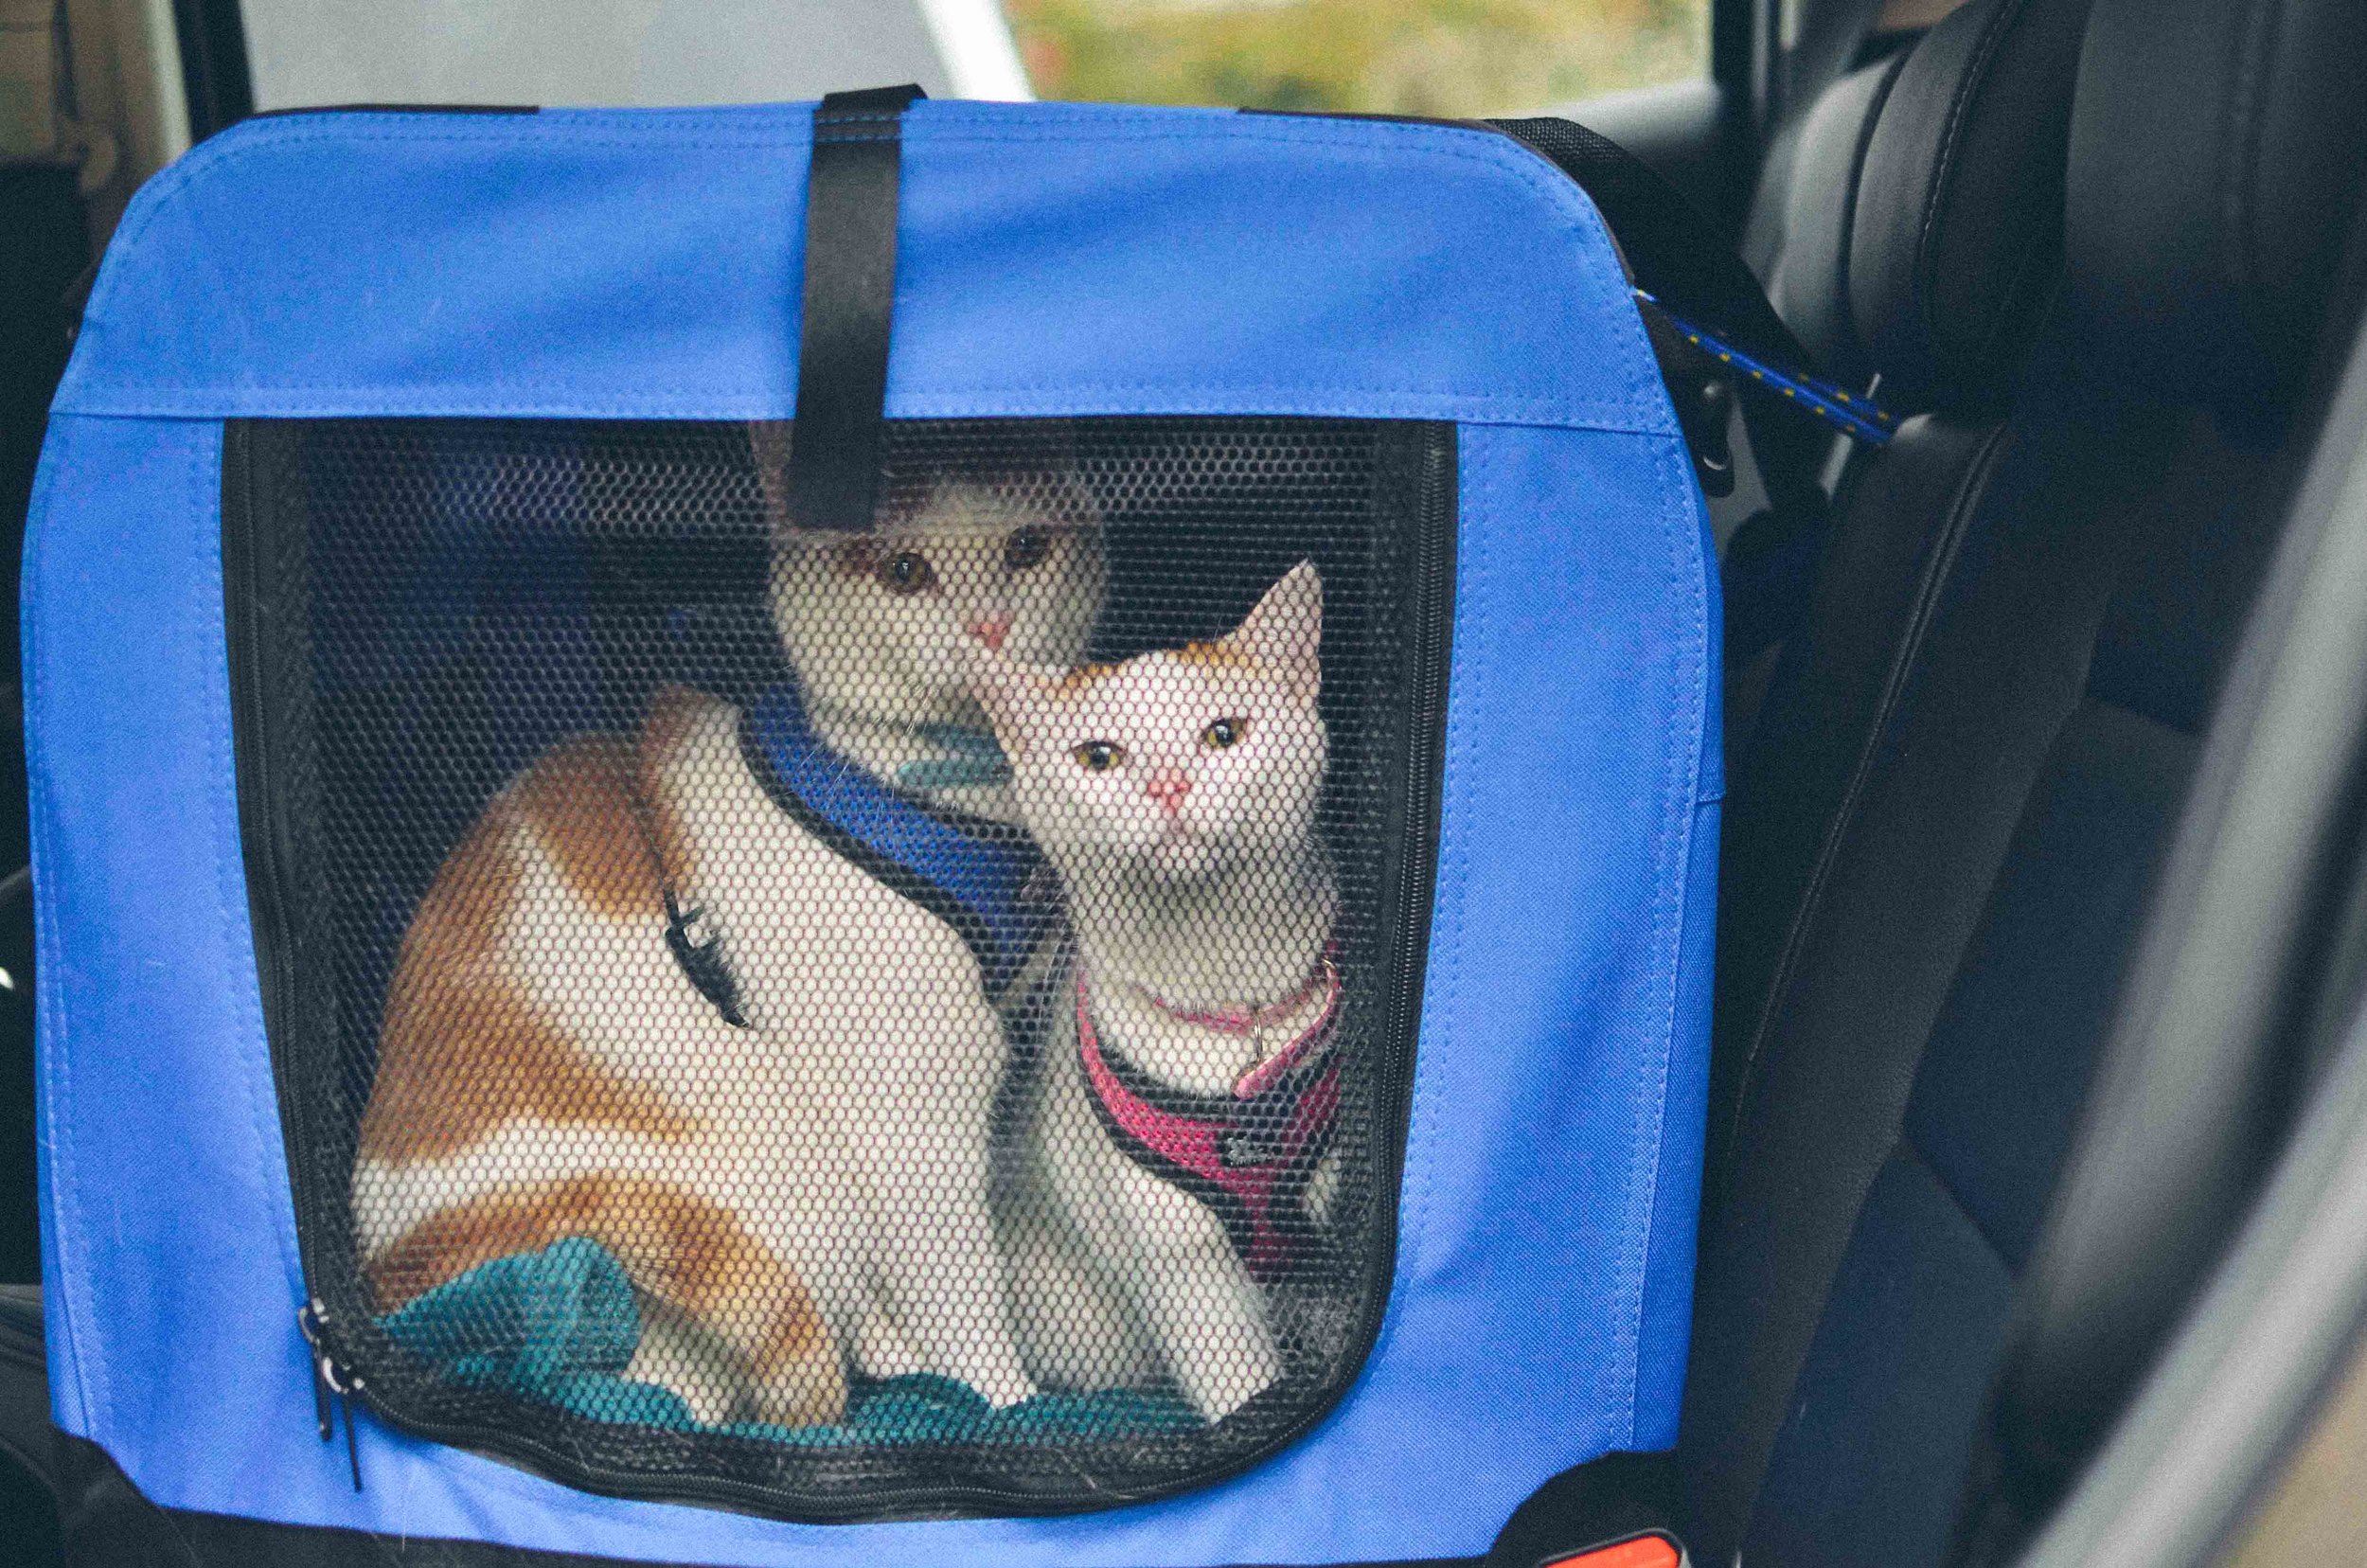 THE BEST CARRIERS FOR TRAVELLING BY PLANE WITH YOUR CAT